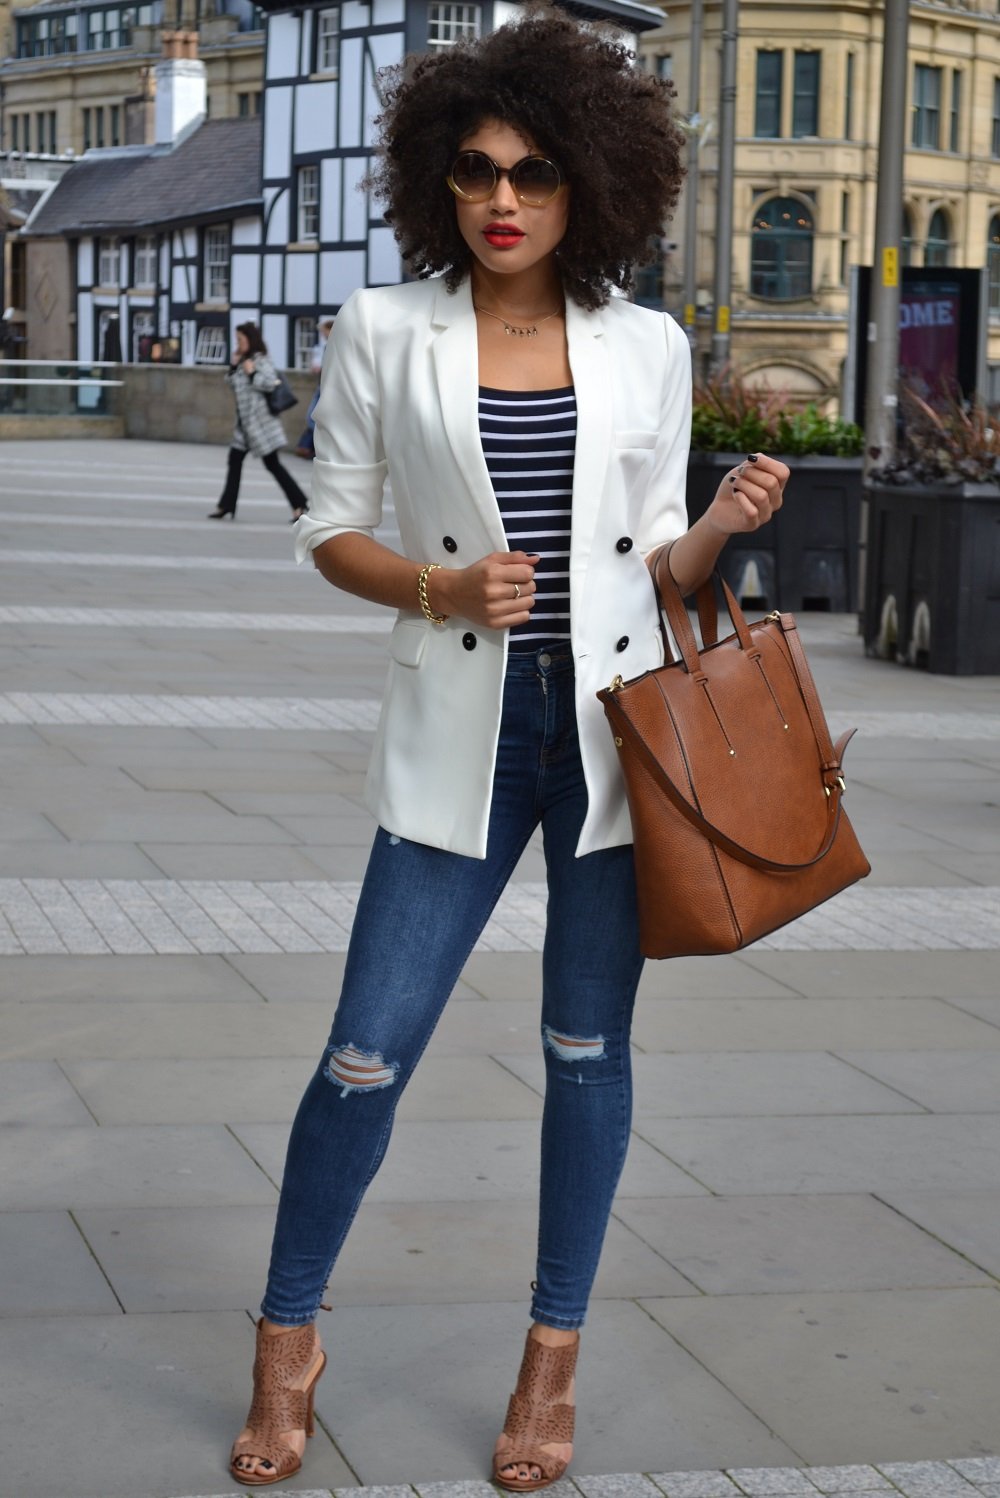 Taylor Morris Sunglasses White Blazer, skinny jeans and heels outfit